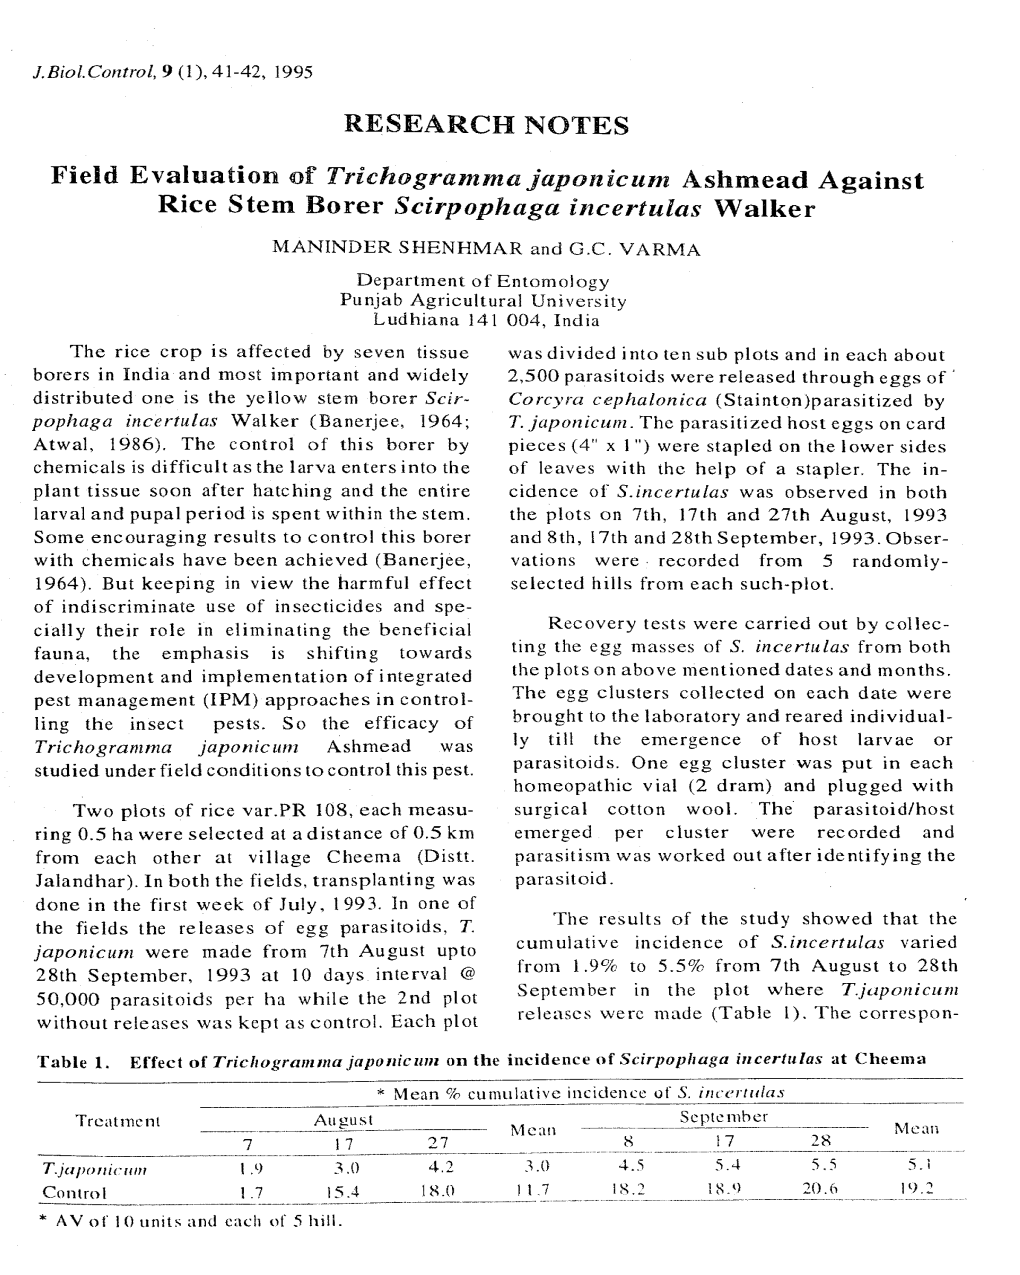 RESEARCH NOTES Field Evaluation of Trichogrammajaponicum